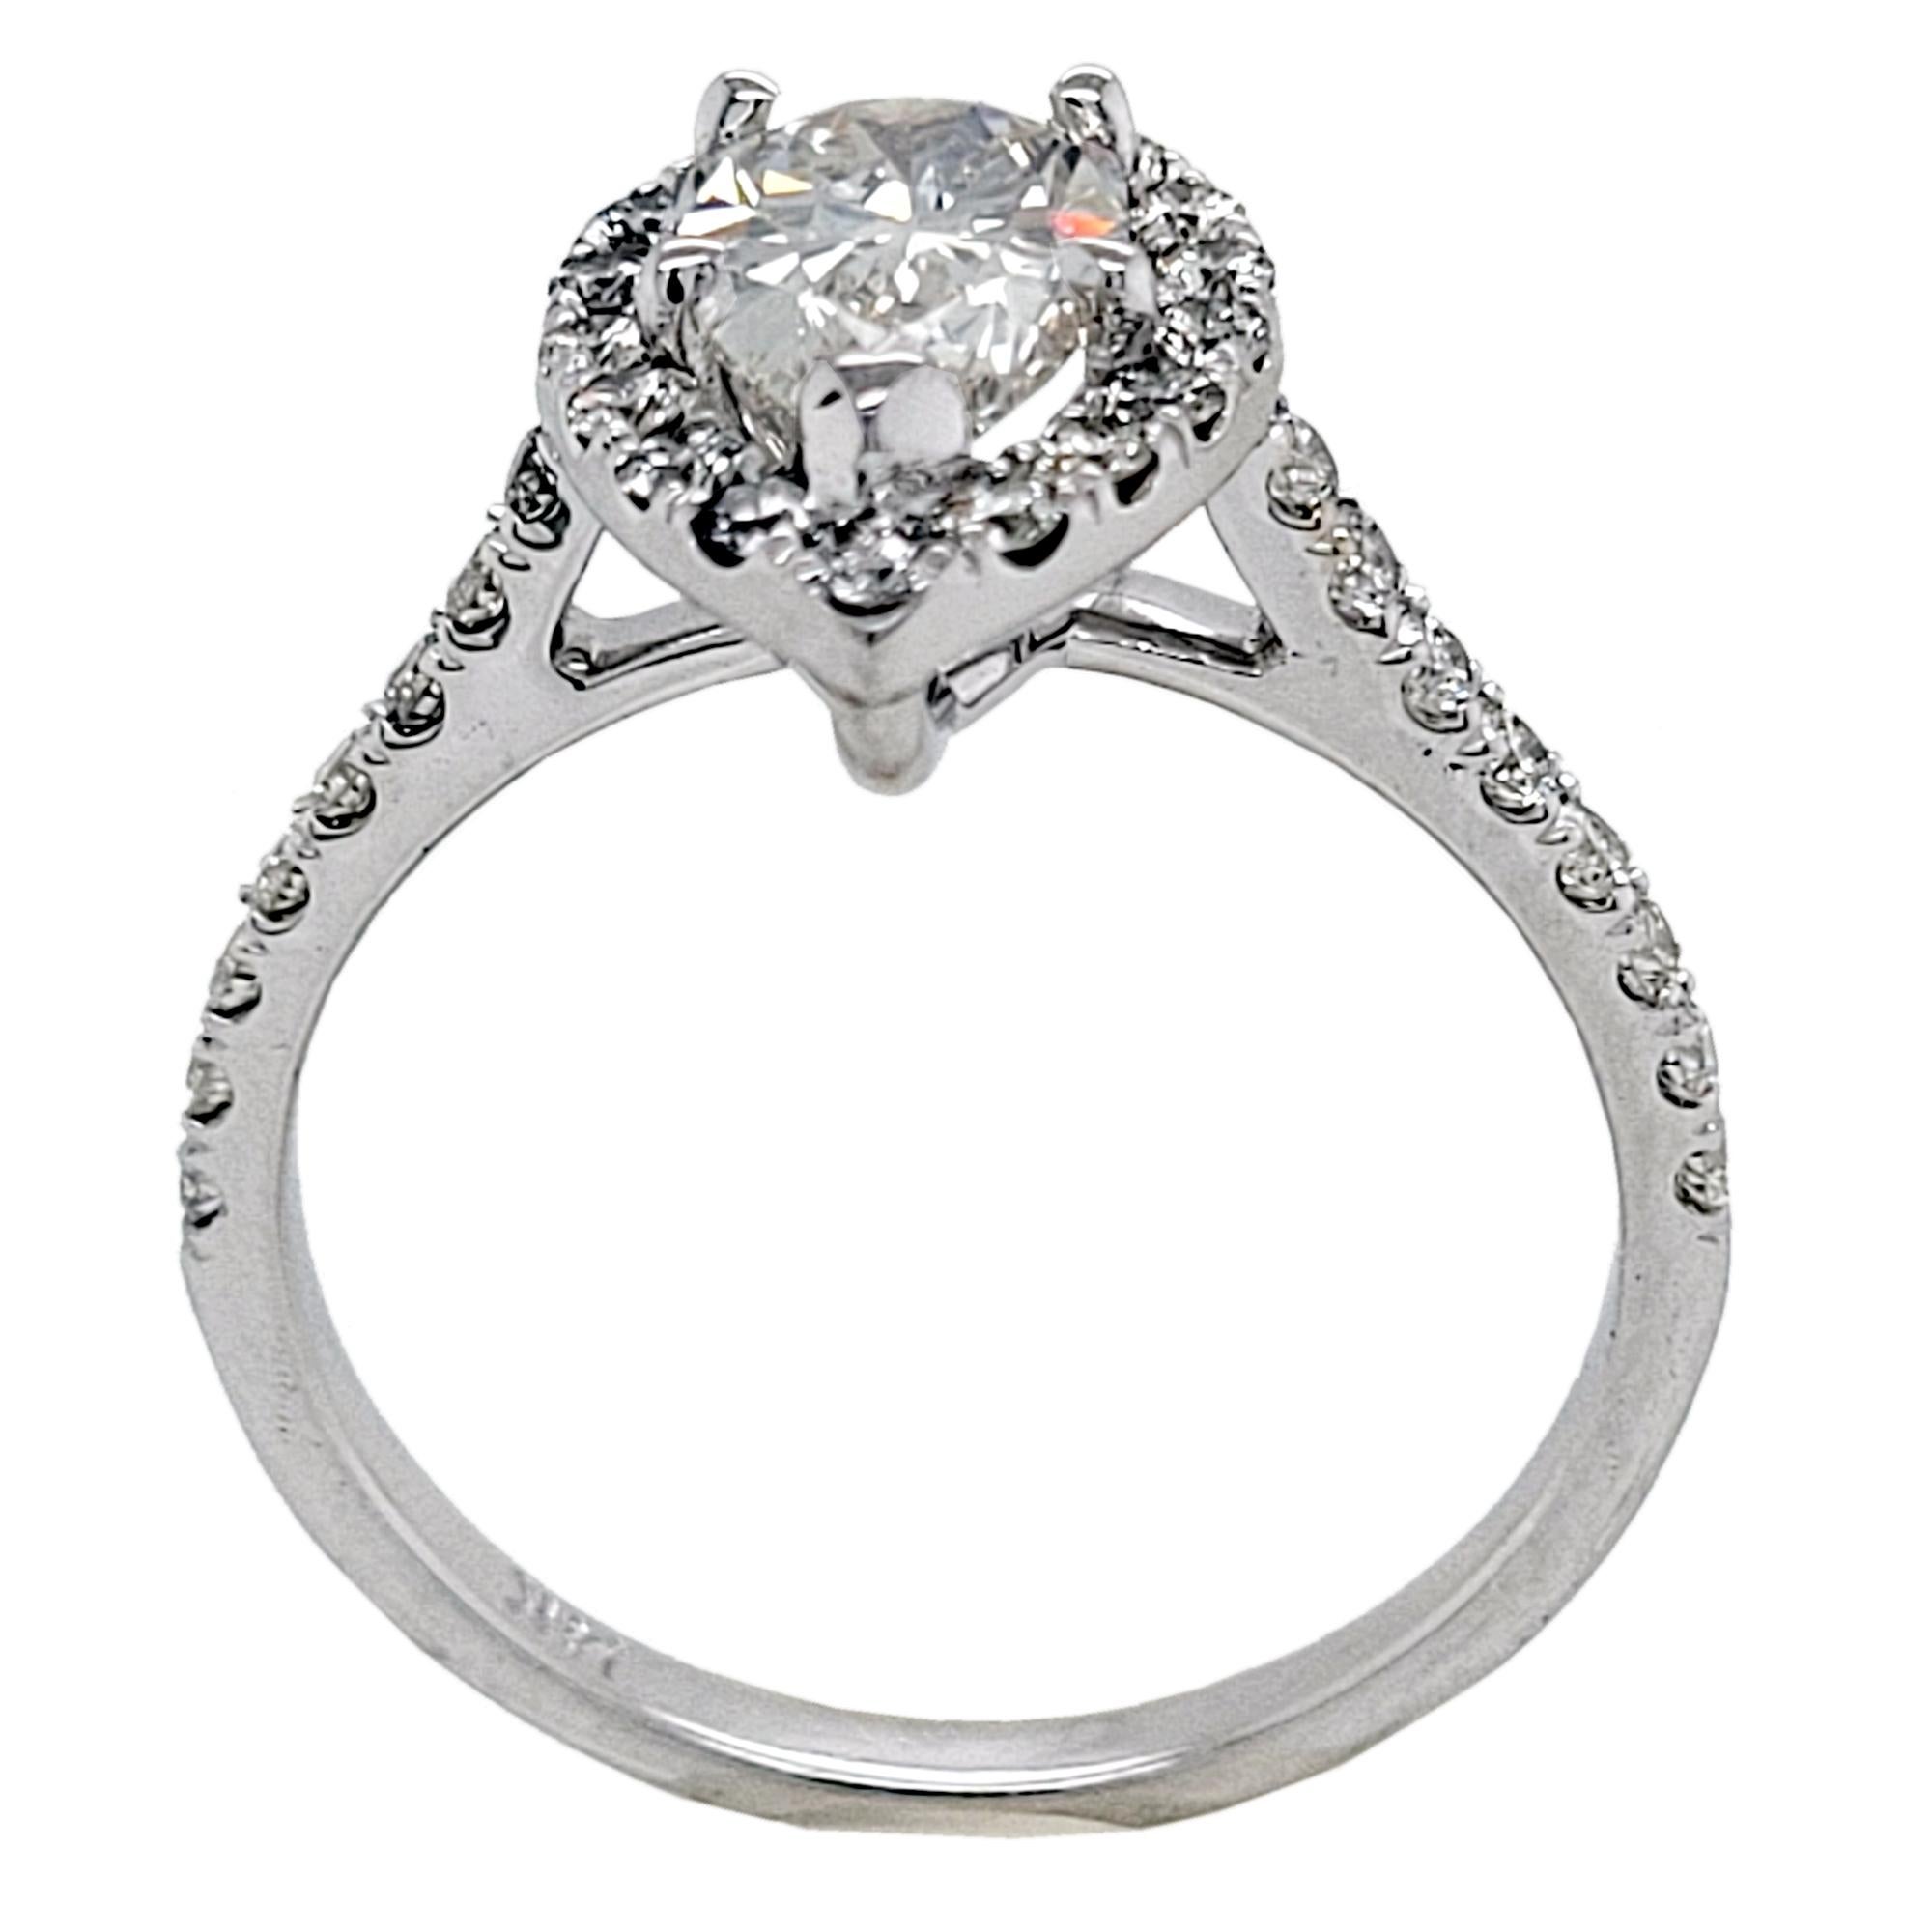 A 1.20 Ct Pear Shaped I/SI2 GIA certified center Diamond set in a beautiful 14K Gold pave set Engagement Ring with Halo.  Total weight of diamonds on the side is 0.60 Ct.

Diamond specs:
Center stone: 1.20 Ct GIA Certified I/Si2 Pear shape 
Center